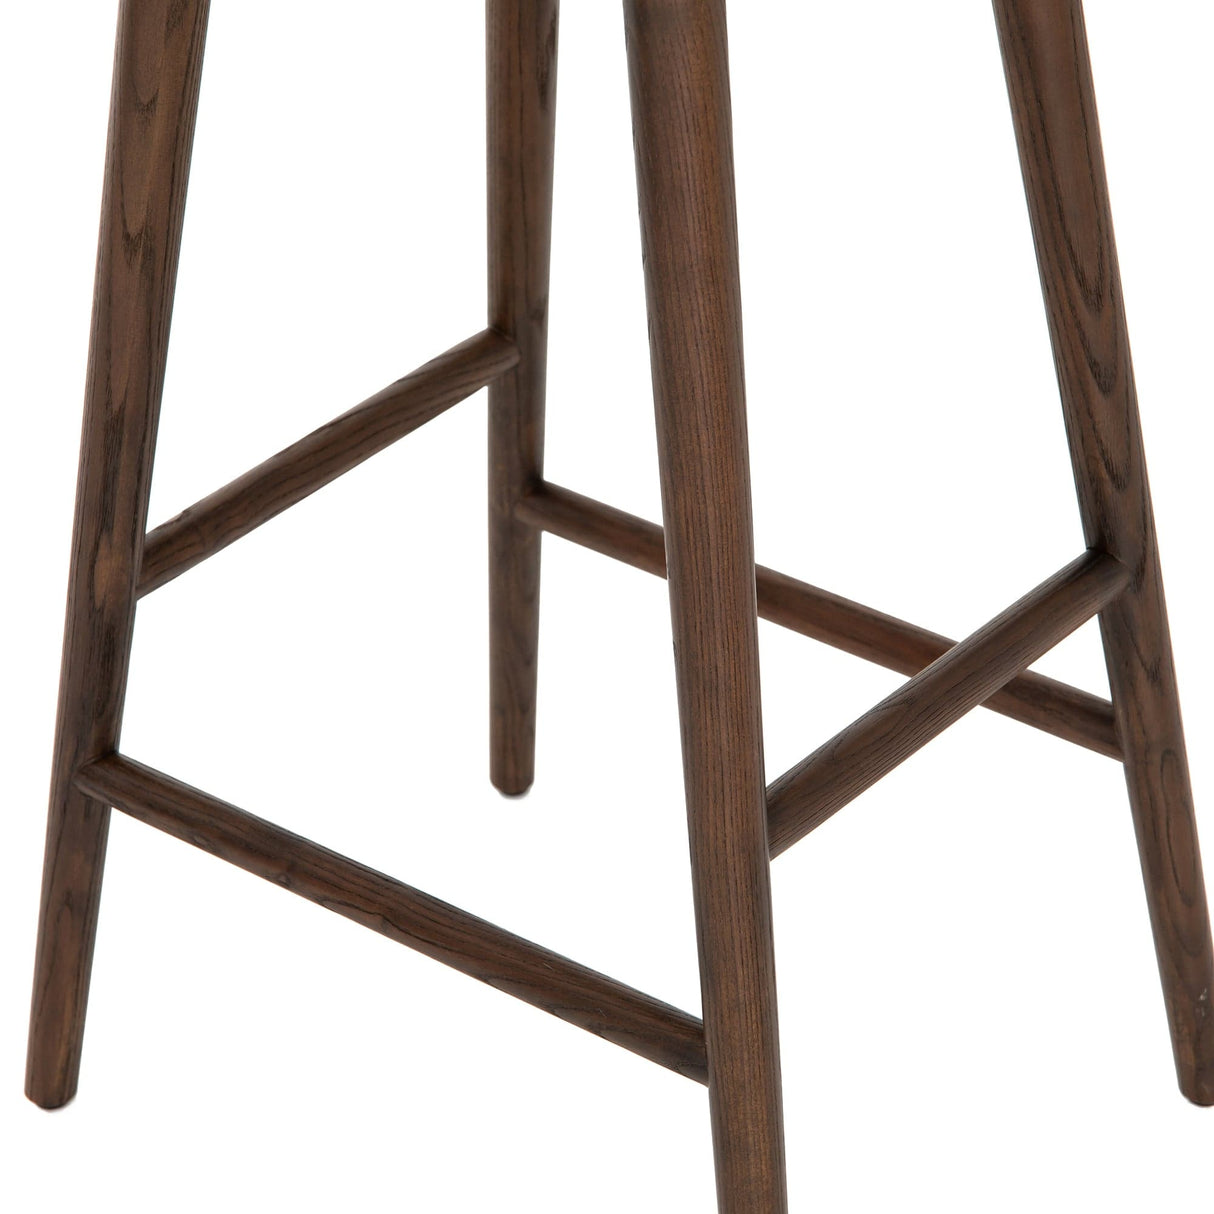 Four Hands Union Bar & Counter Stool Furniture